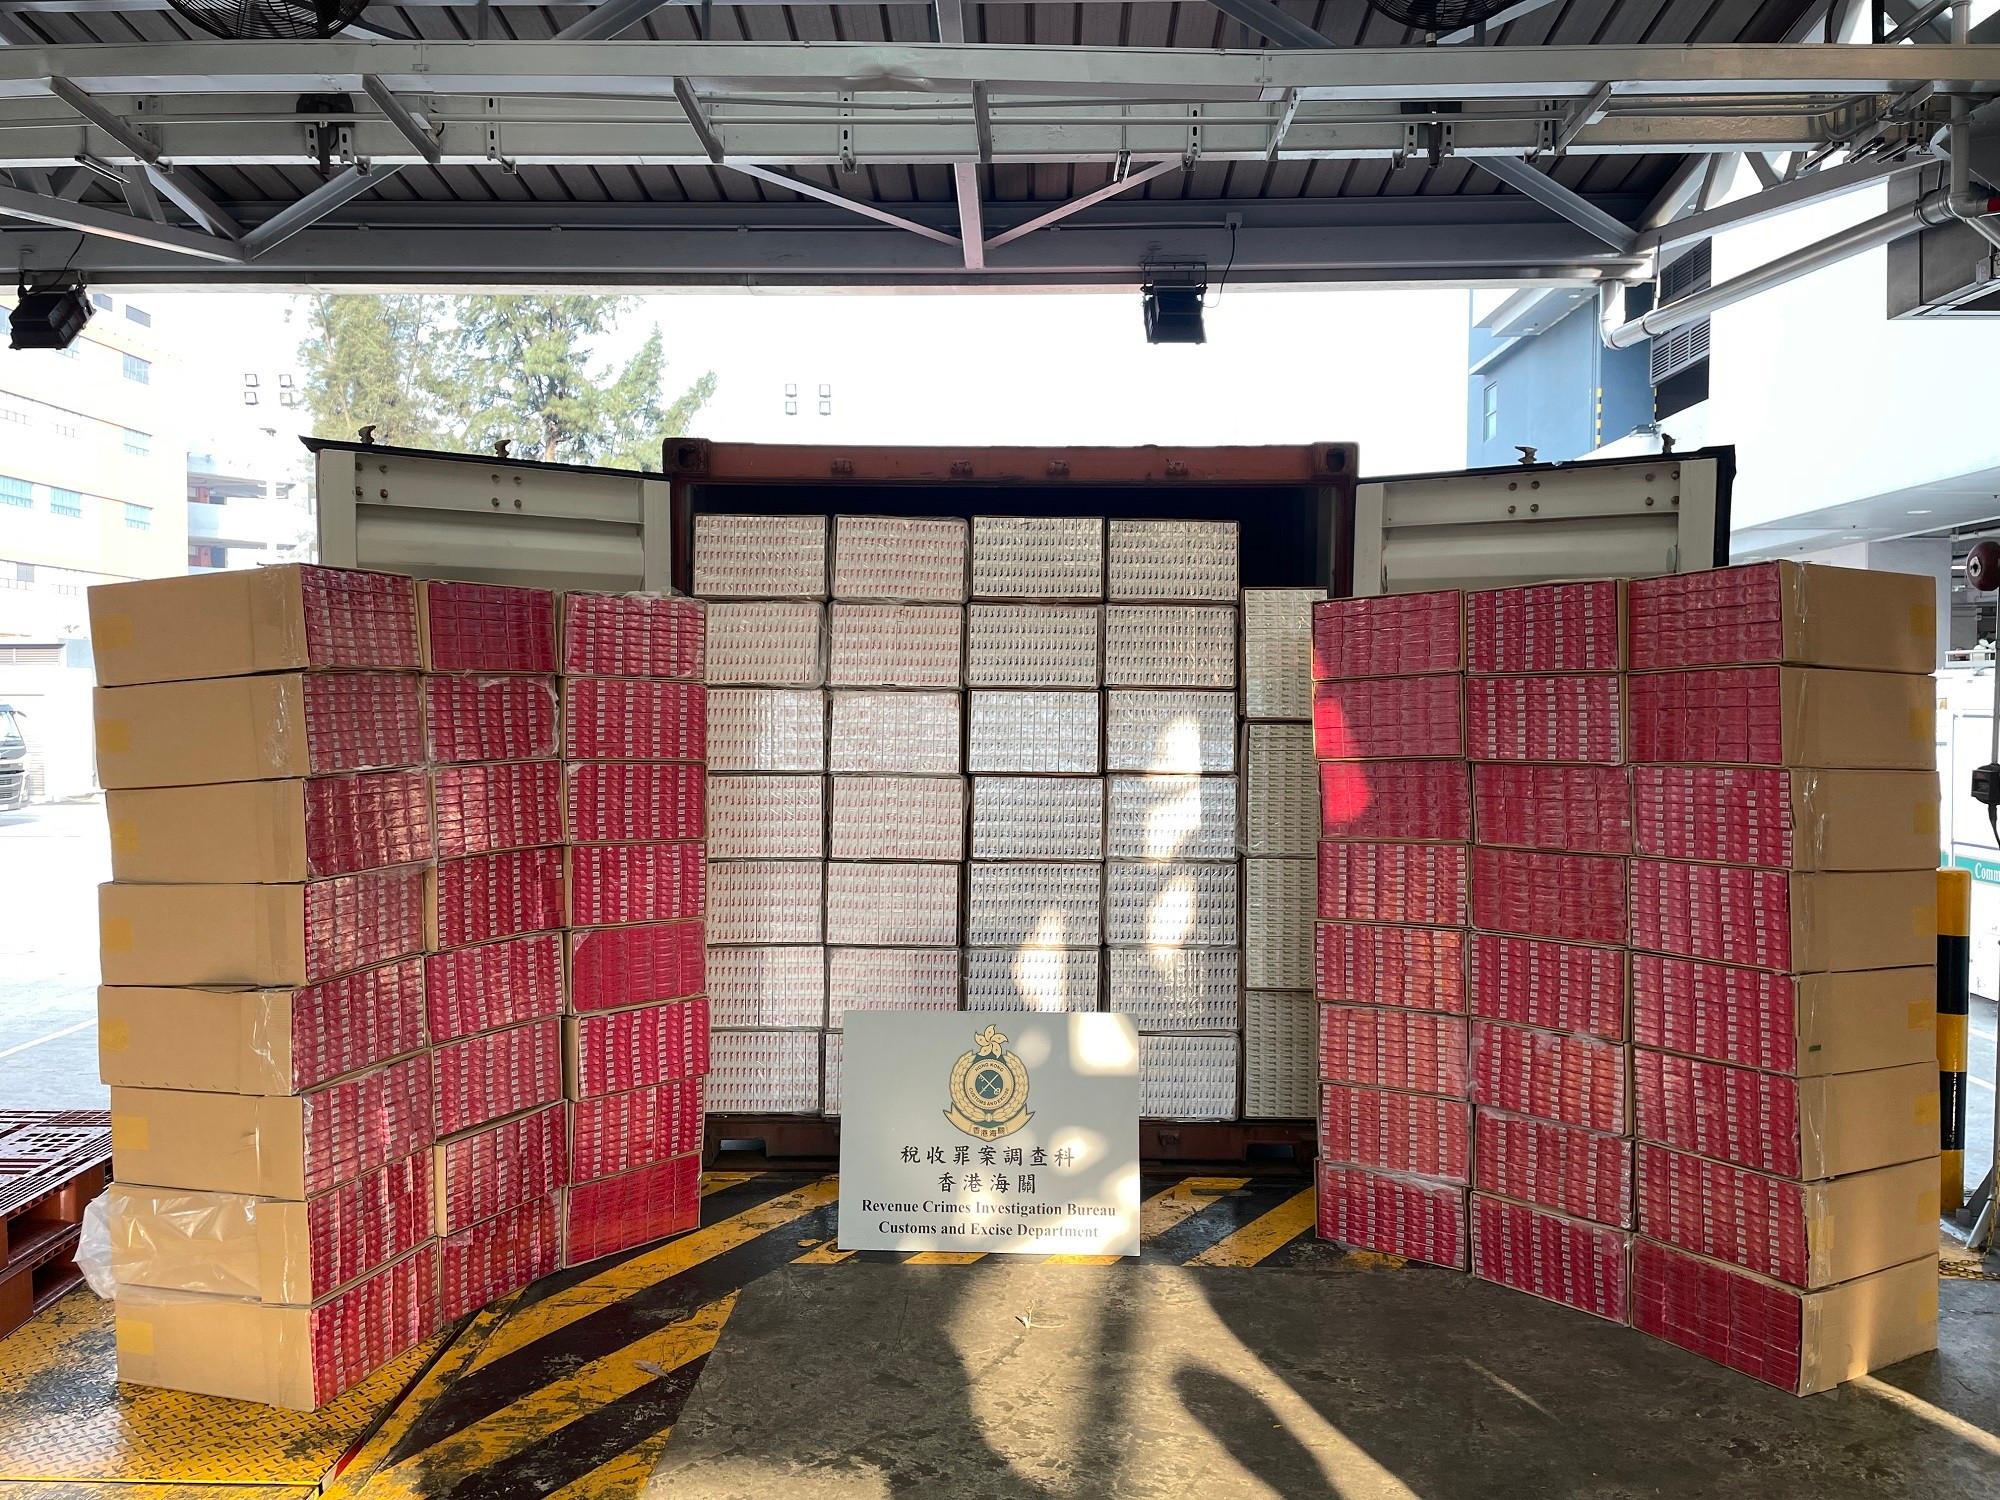 Hong Kong Customs on January 3 and today (January 6) seized a total of about 19 million suspected illicit cigarettes with an estimated market value of about $52 million and a duty potential of about $36 million at the Kwai Chung Customhouse Cargo Examination Compound. Photo shows the suspected illicit cigarettes seized by Customs officers from a seaborne container.